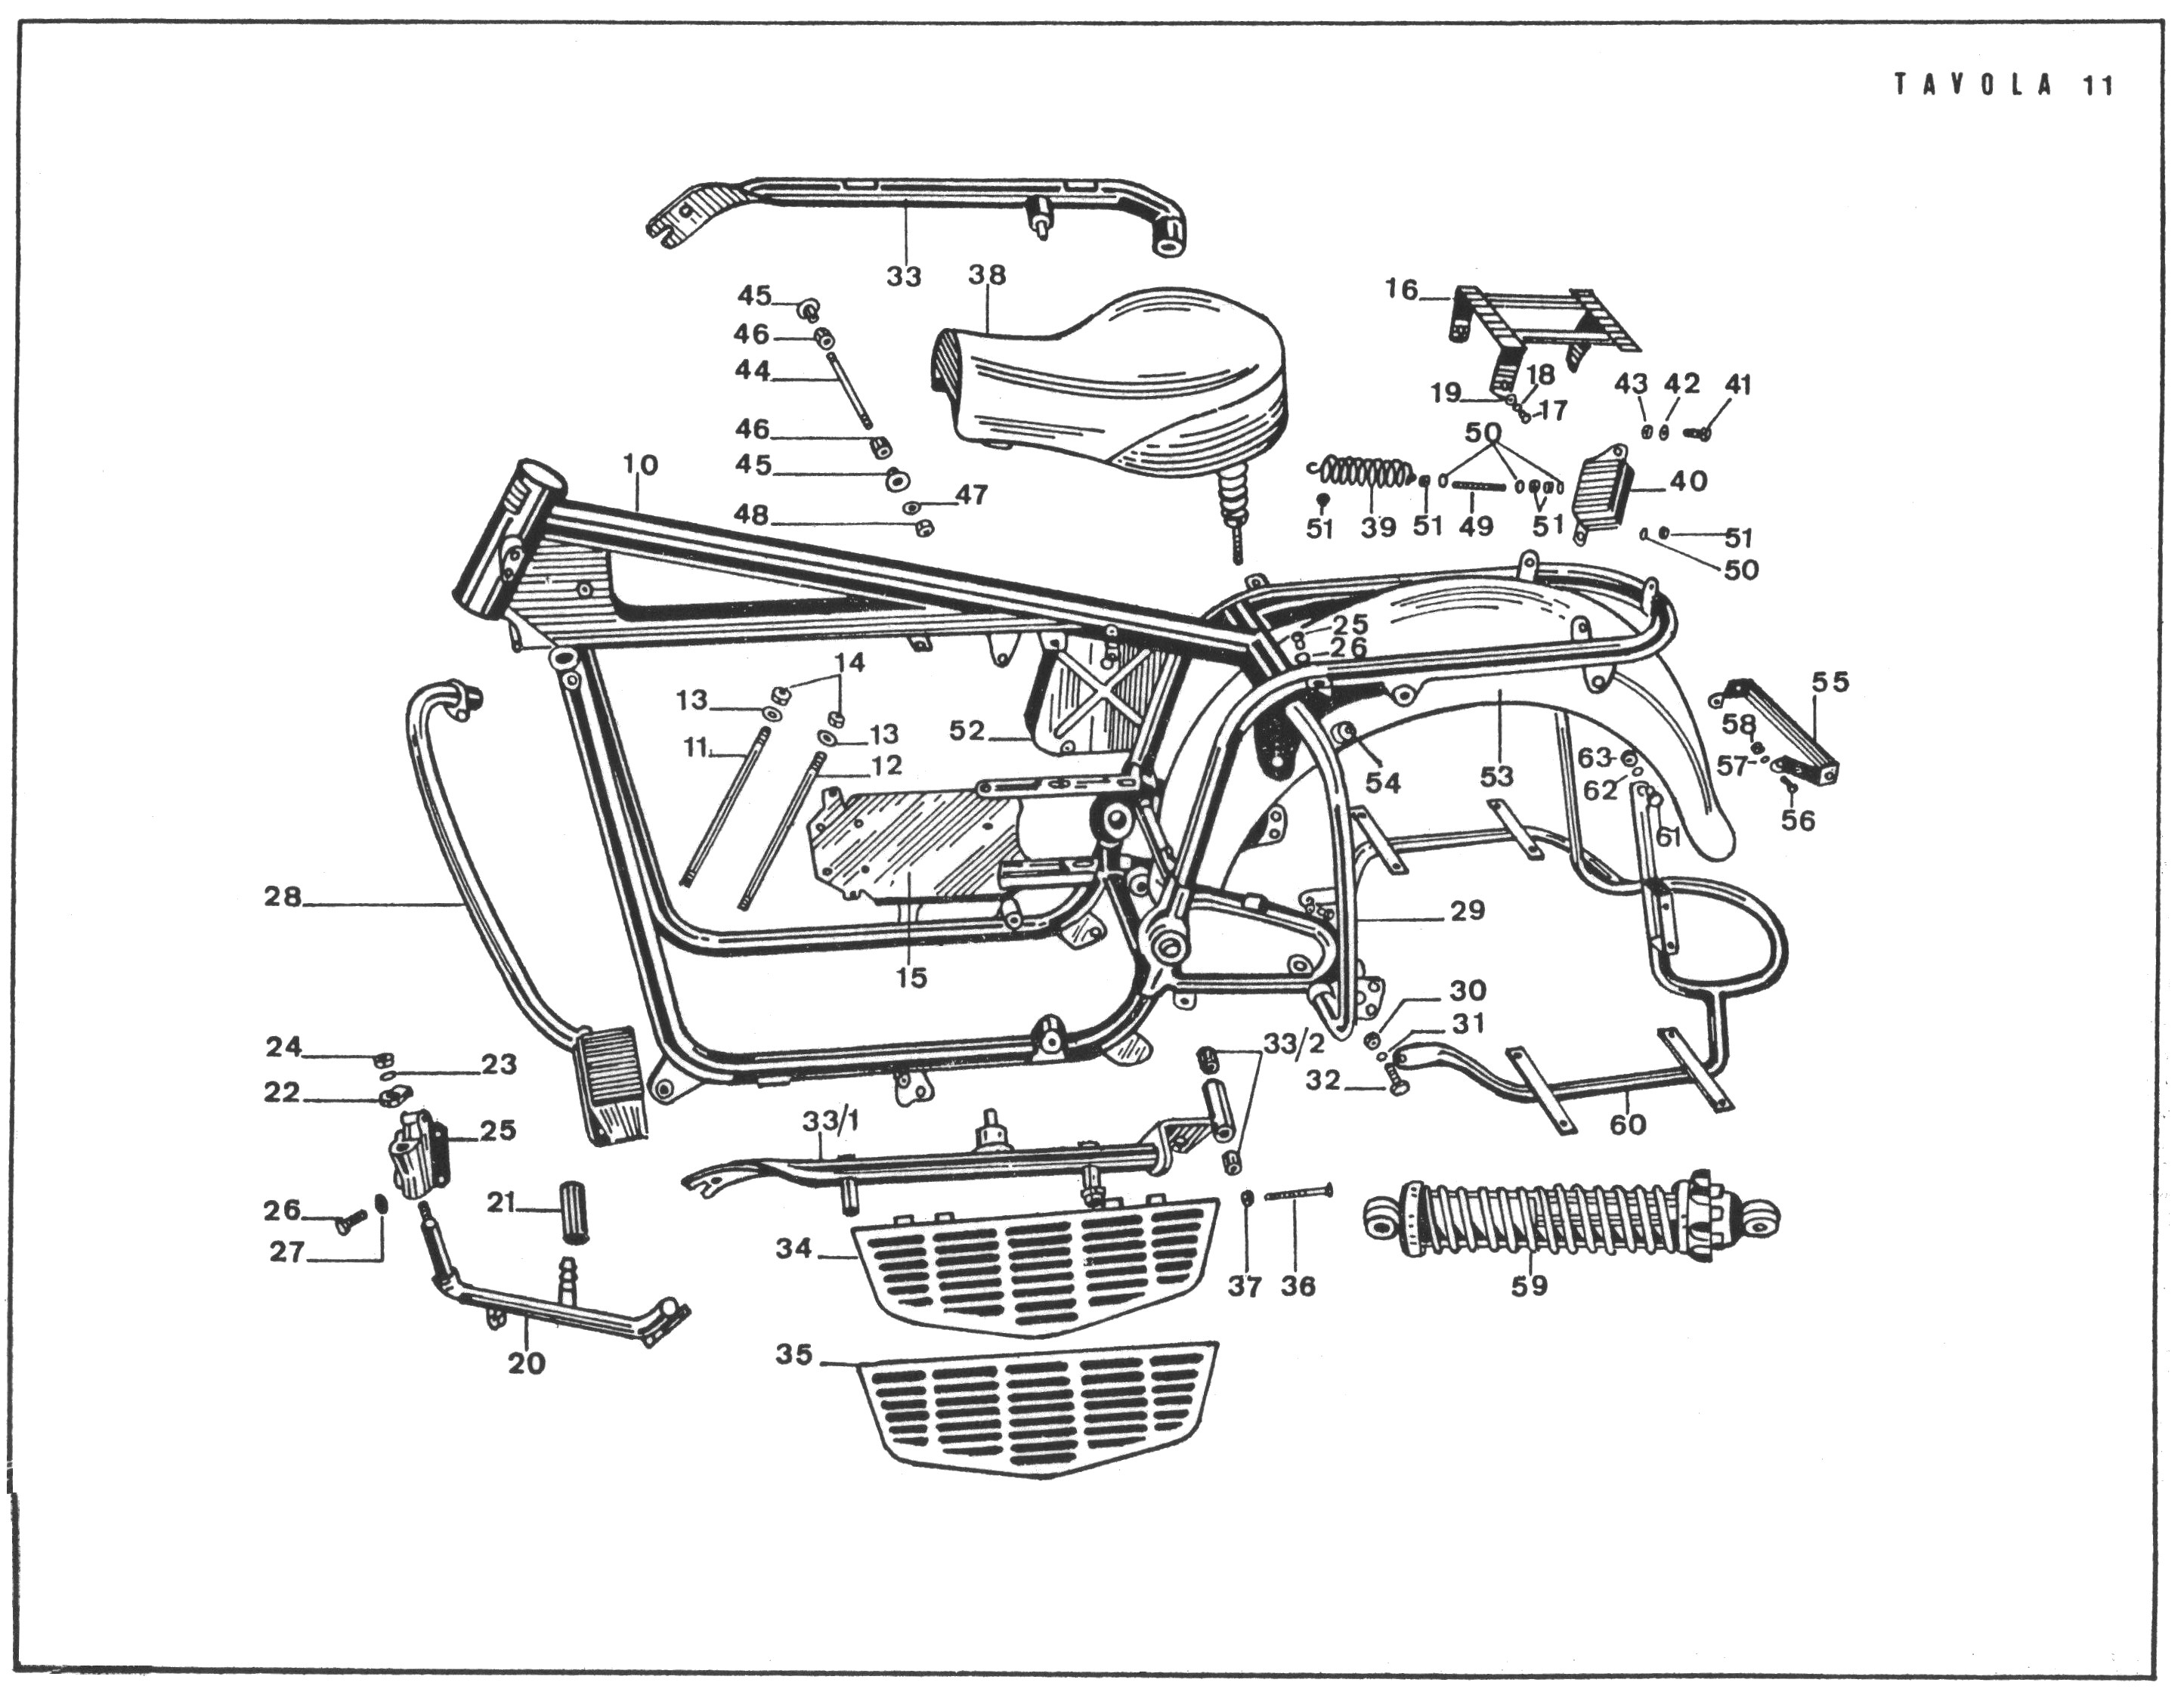 In looking at the Police Supplement to the 750 Spare Parts Catalog (dated October 1970), I discovered that the Eldorado spare parts catalog shows the shape of the footboard to be very similar to the earlier version shown here. But, the rails are clearly the shape of the later footboards (thanks to Charley Cole for identifying this difference).